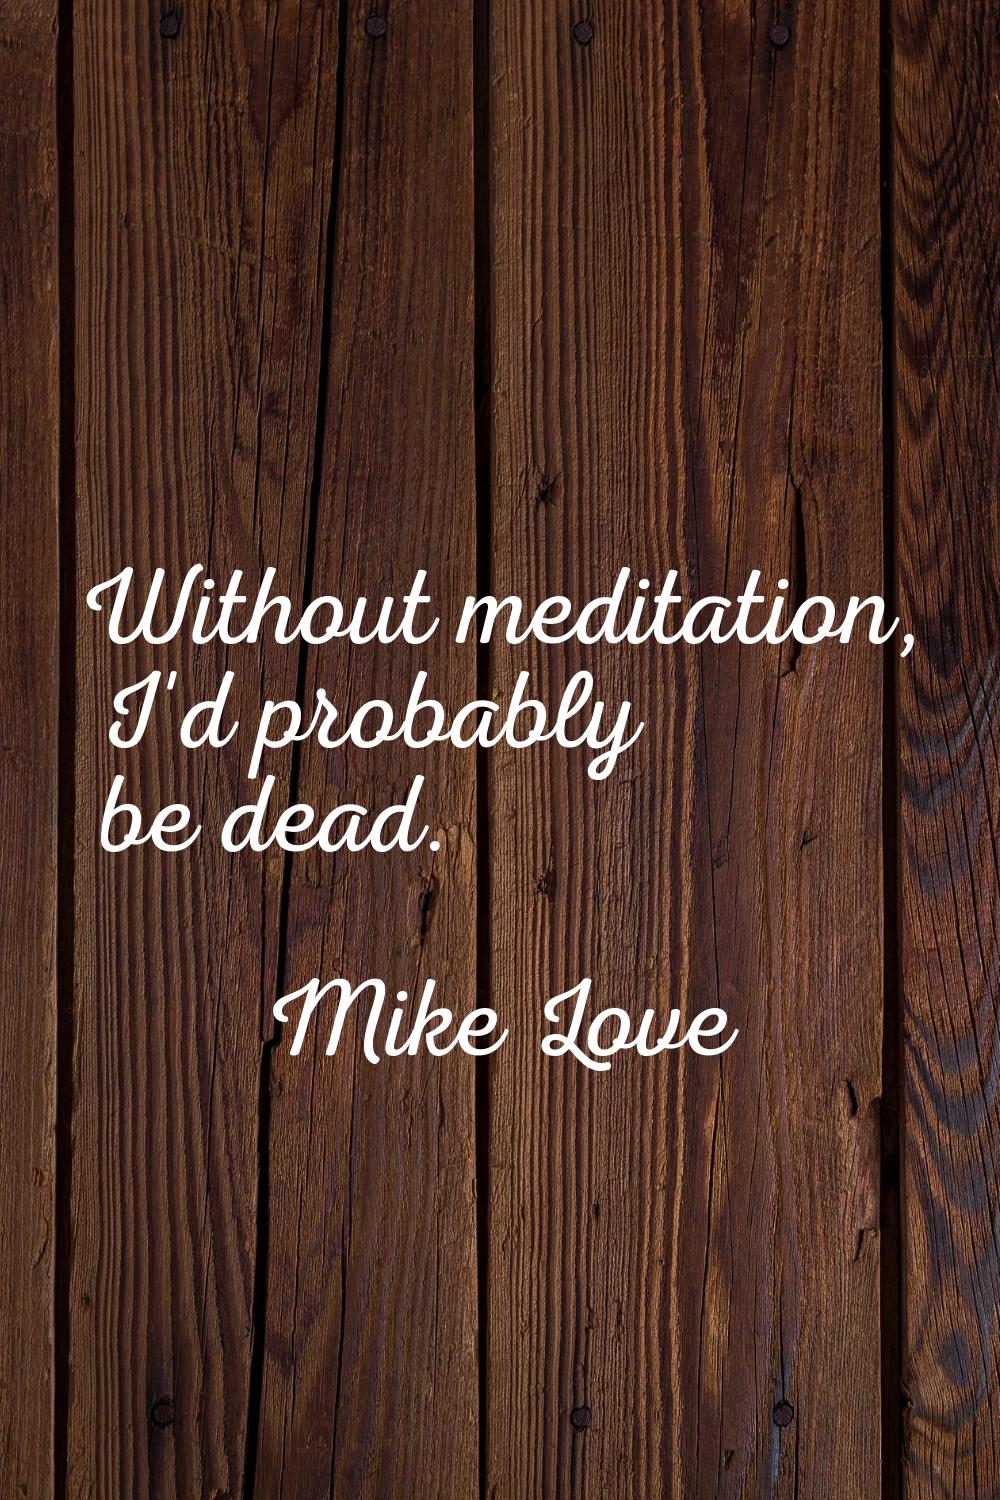 Without meditation, I'd probably be dead.